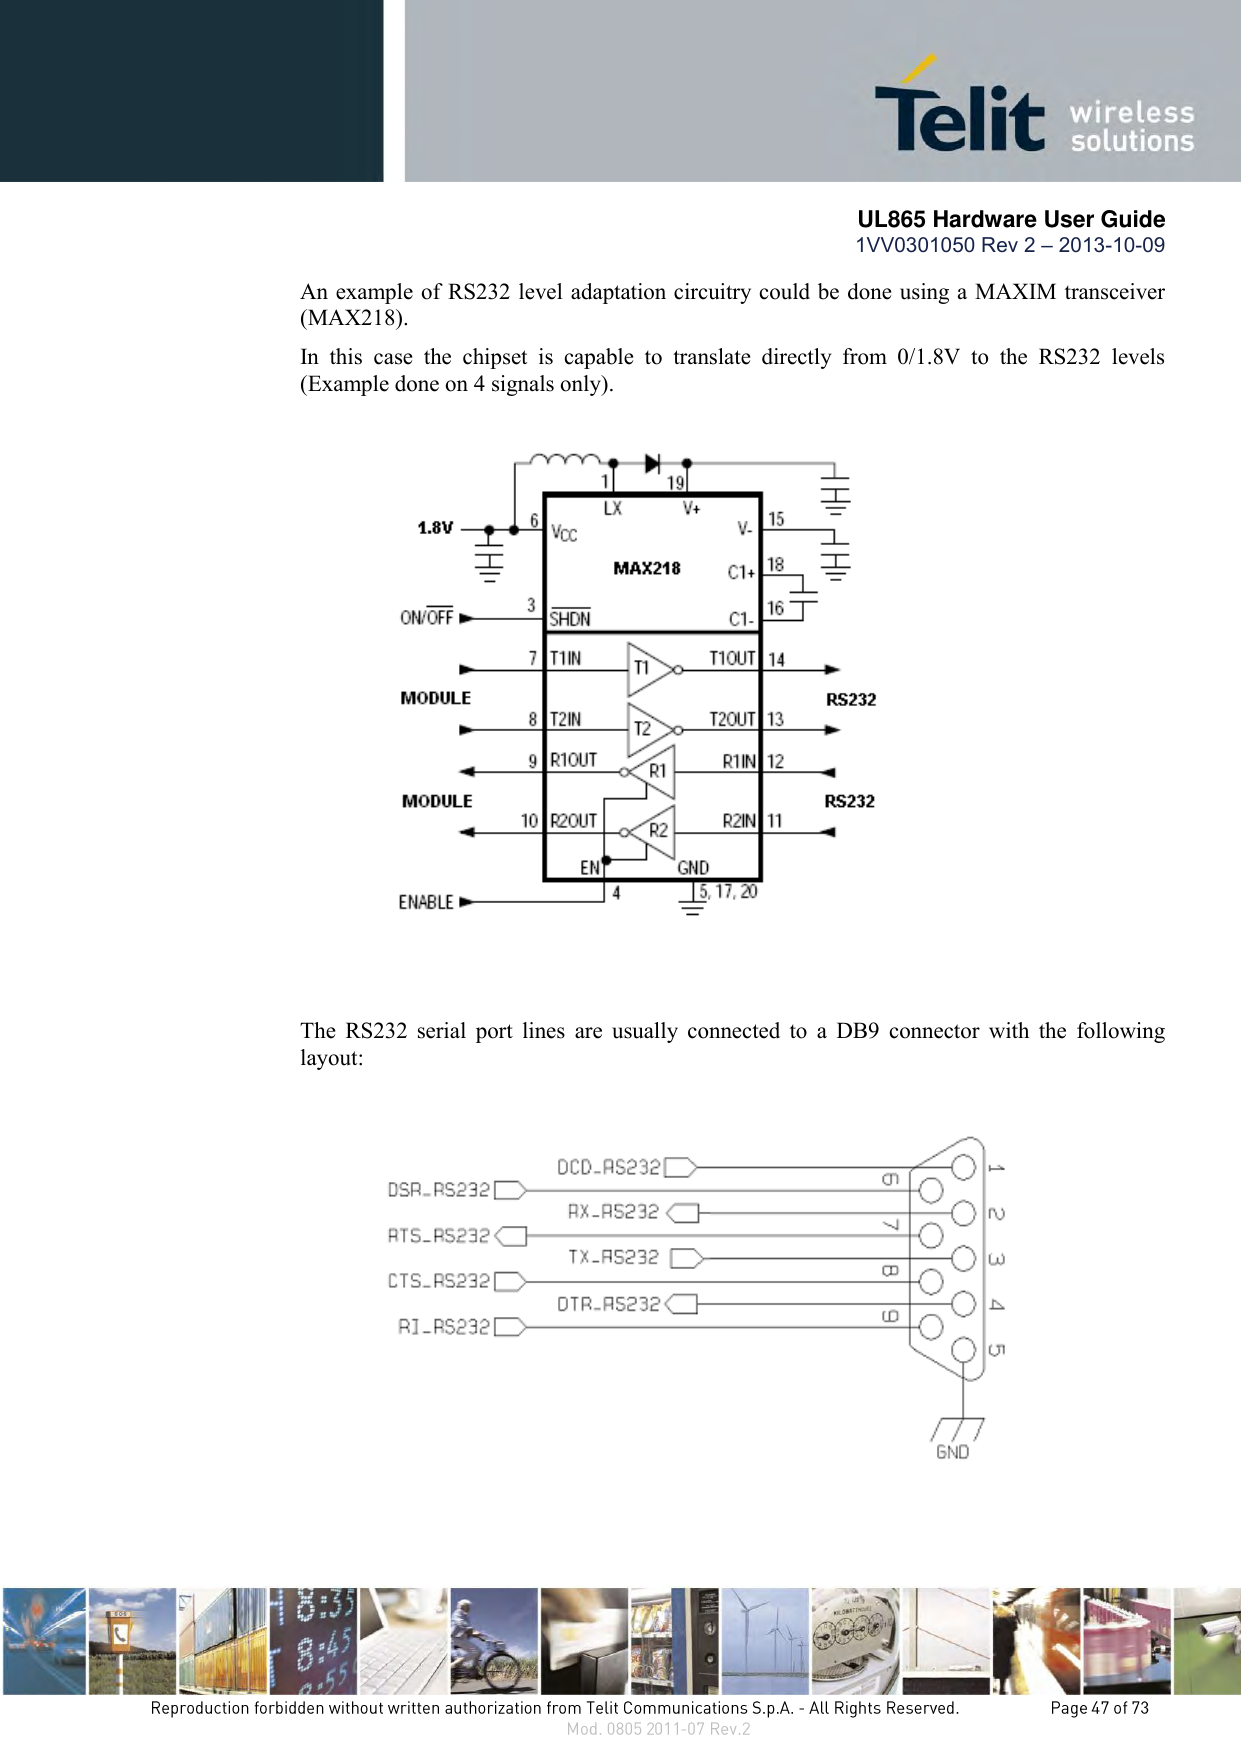       UL865 Hardware User Guide 1VV0301050 Rev 2 – 2013-10-09   An example of RS232 level adaptation circuitry could be done using a MAXIM transceiver (MAX218).  In  this  case  the  chipset  is  capable  to  translate  directly  from  0/1.8V  to  the  RS232  levels (Example done on 4 signals only).      The  RS232  serial  port  lines  are  usually  connected  to  a  DB9  connector  with  the  following layout:    